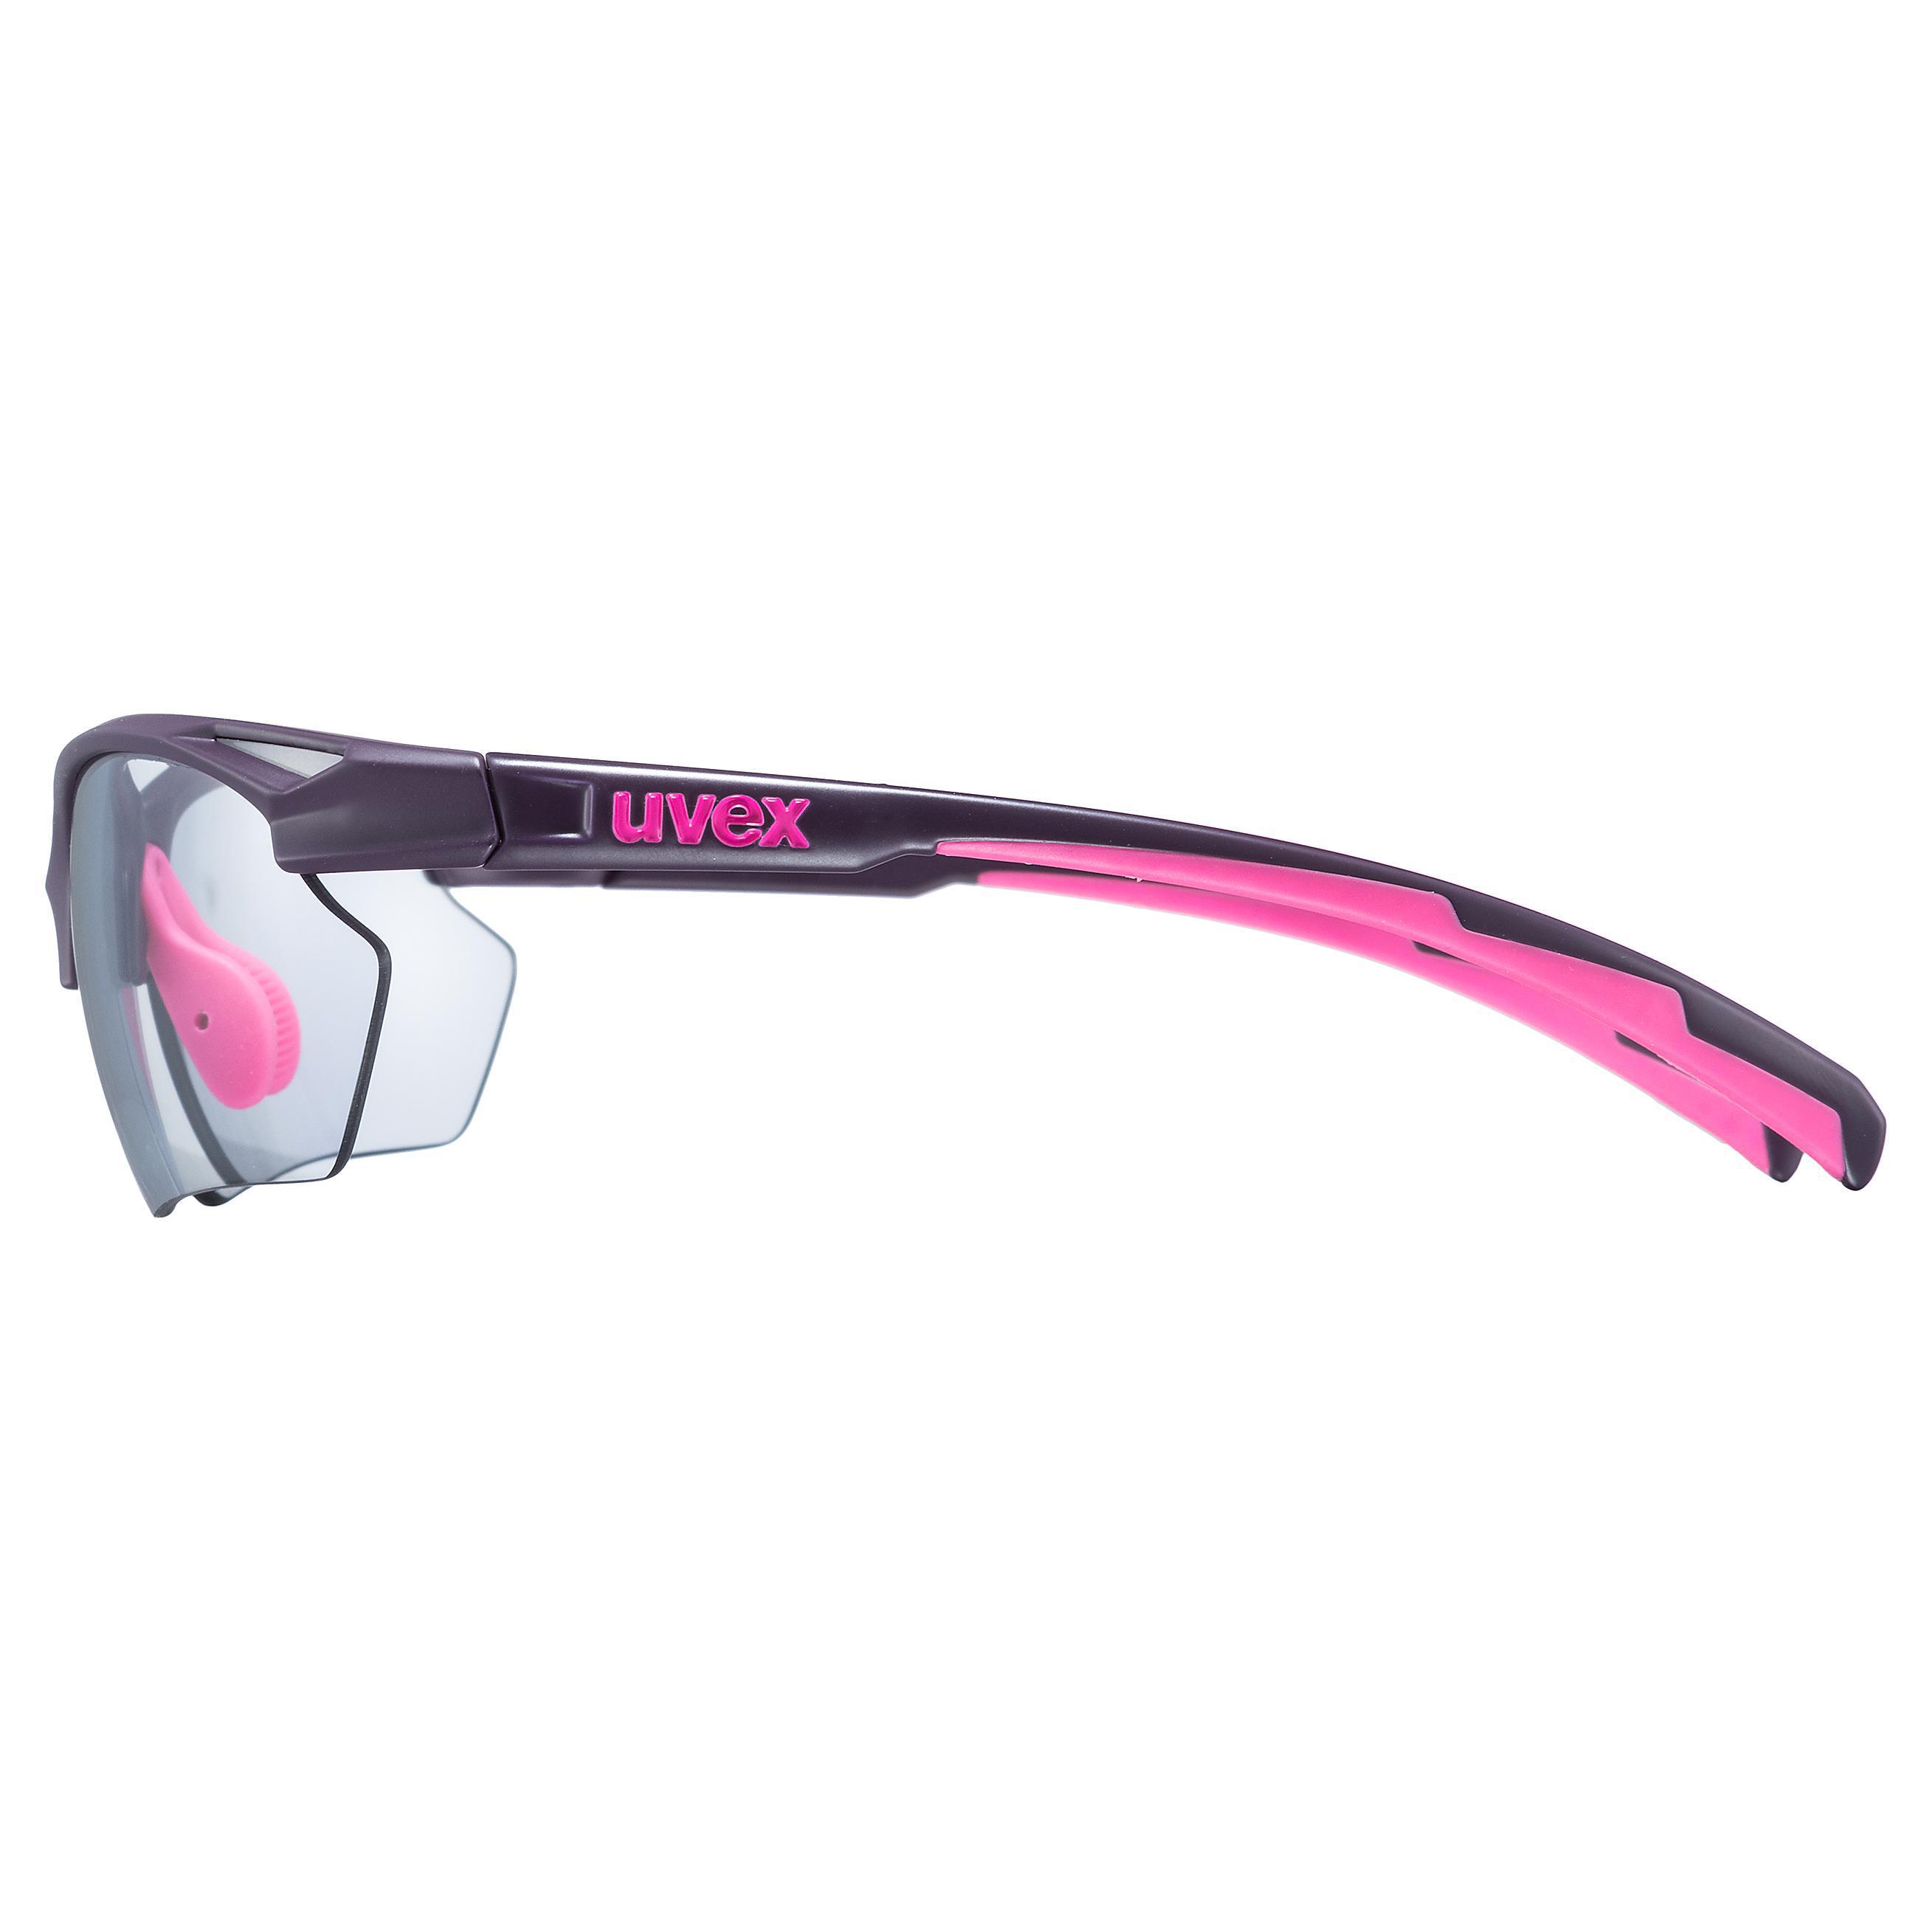 Consequent US dollar Moskee uvex sportstyle 802 s V pu.pi.m./smk | Eyewear | uvex sports